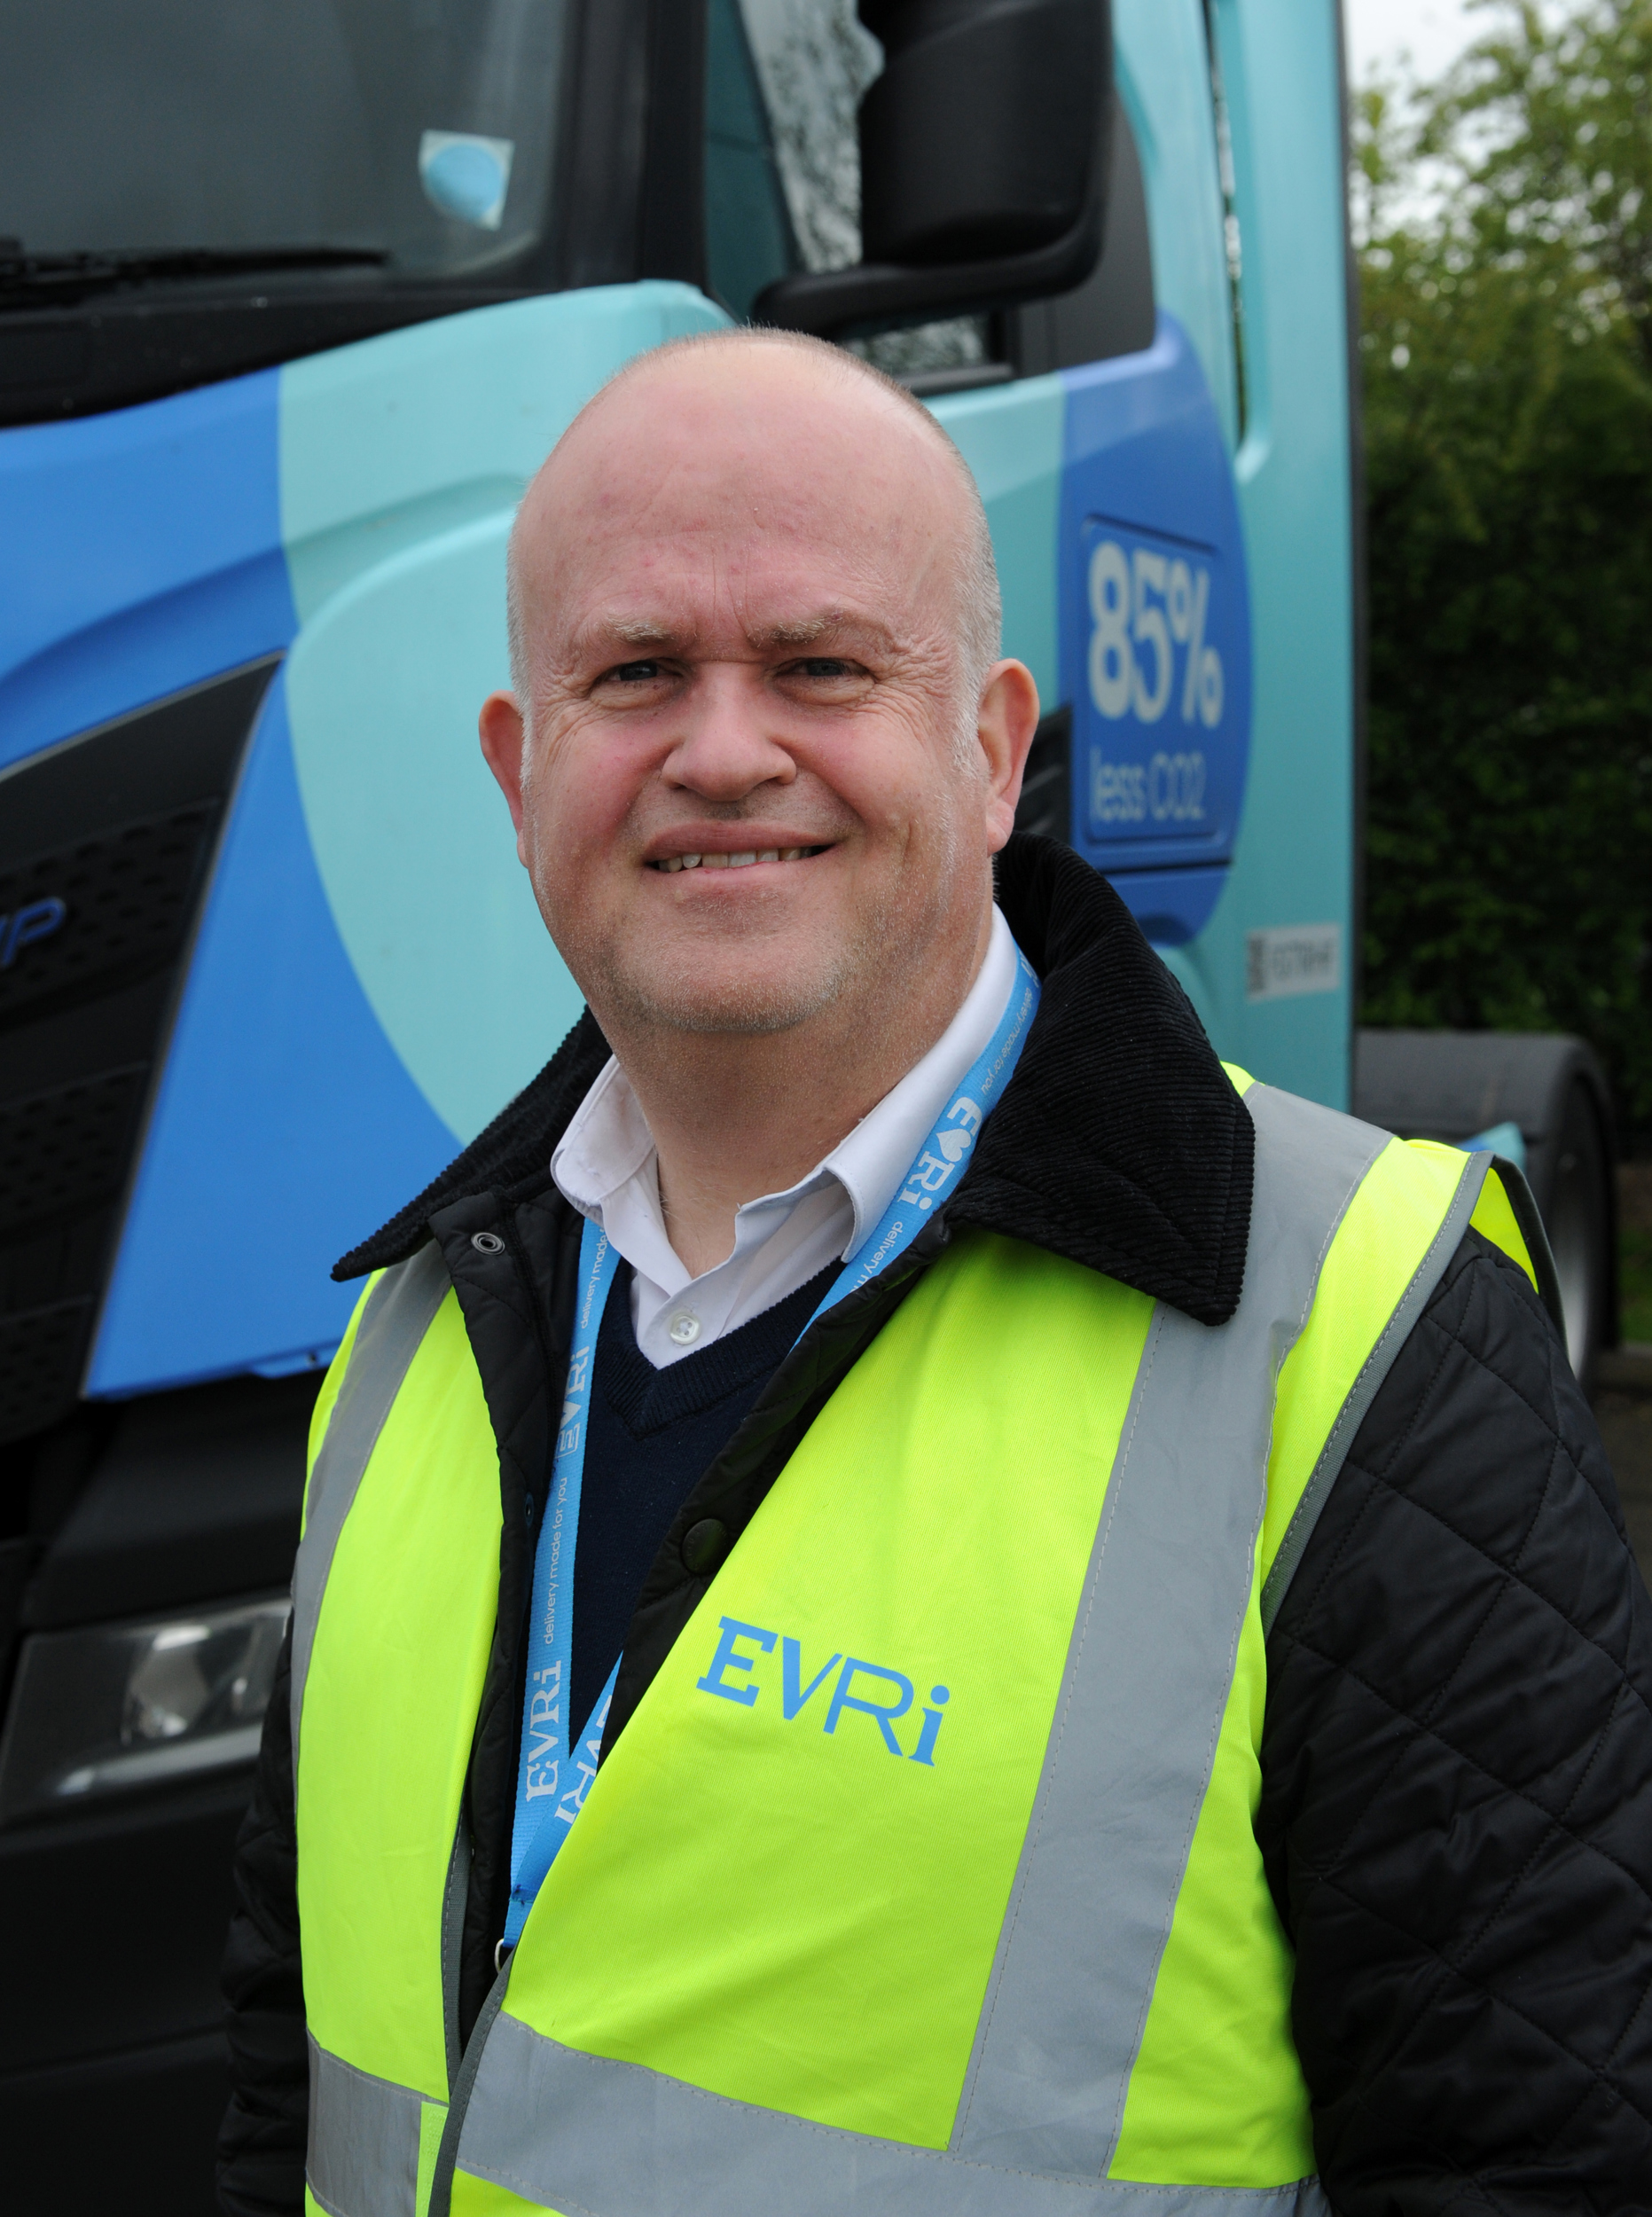 Evri adopts multi-fuel solution for multi-asset delivery fleet